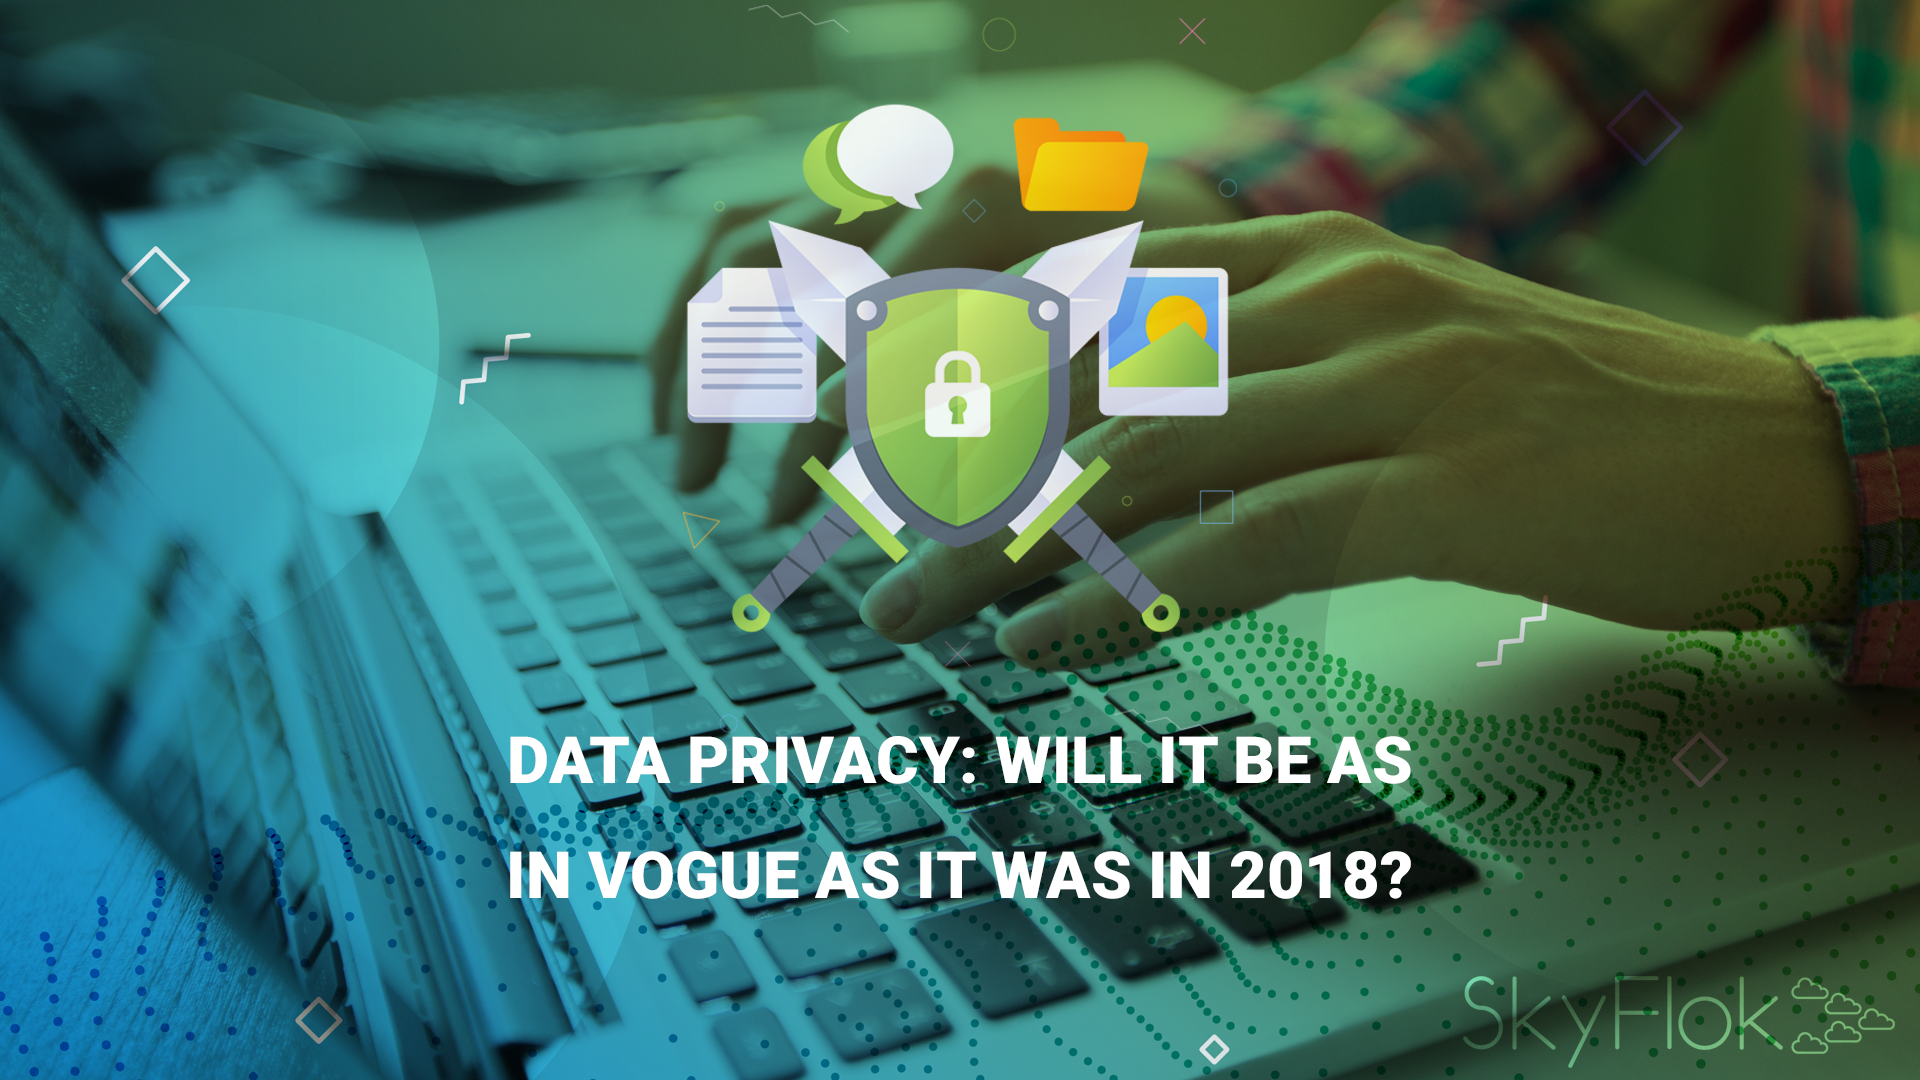 You are currently viewing Data privacy: will it be as in vogue as it was in 2018?